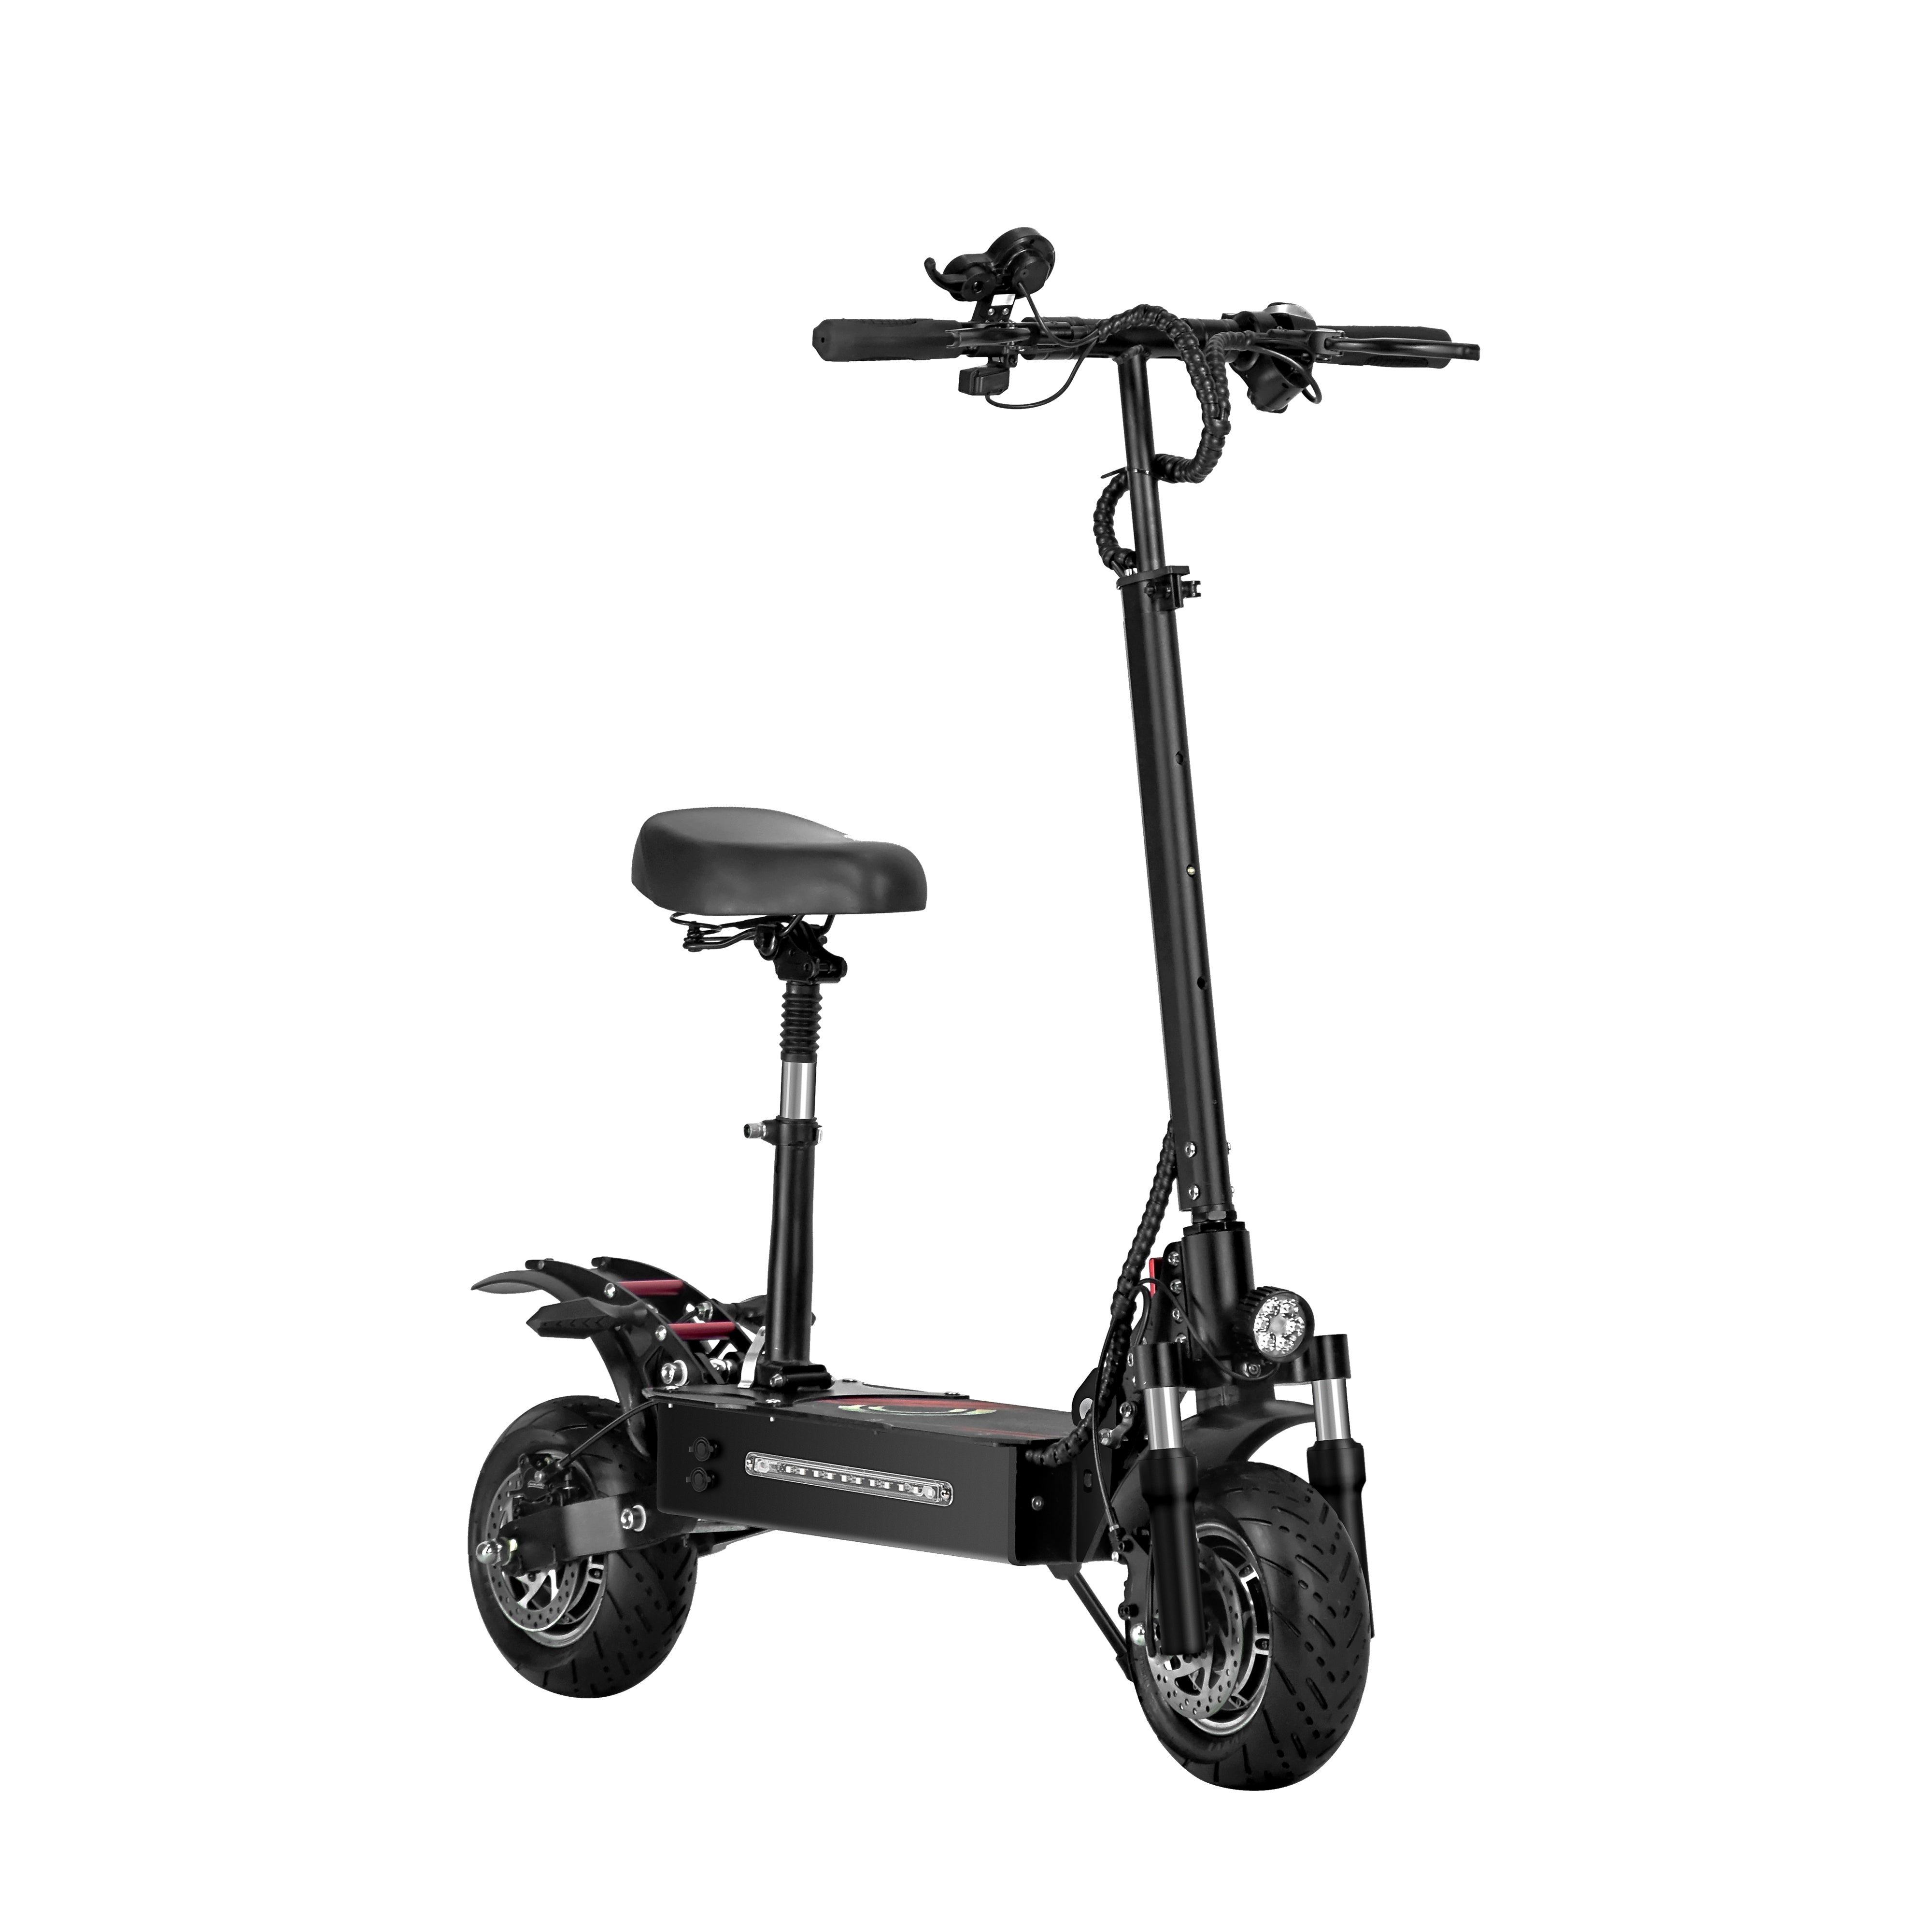 Q7PRO QuickWheel off Road Electric Scooter Motor 3200w, 52v 20ah battery, max speed 45mph, max range 45miles and 10" Tires